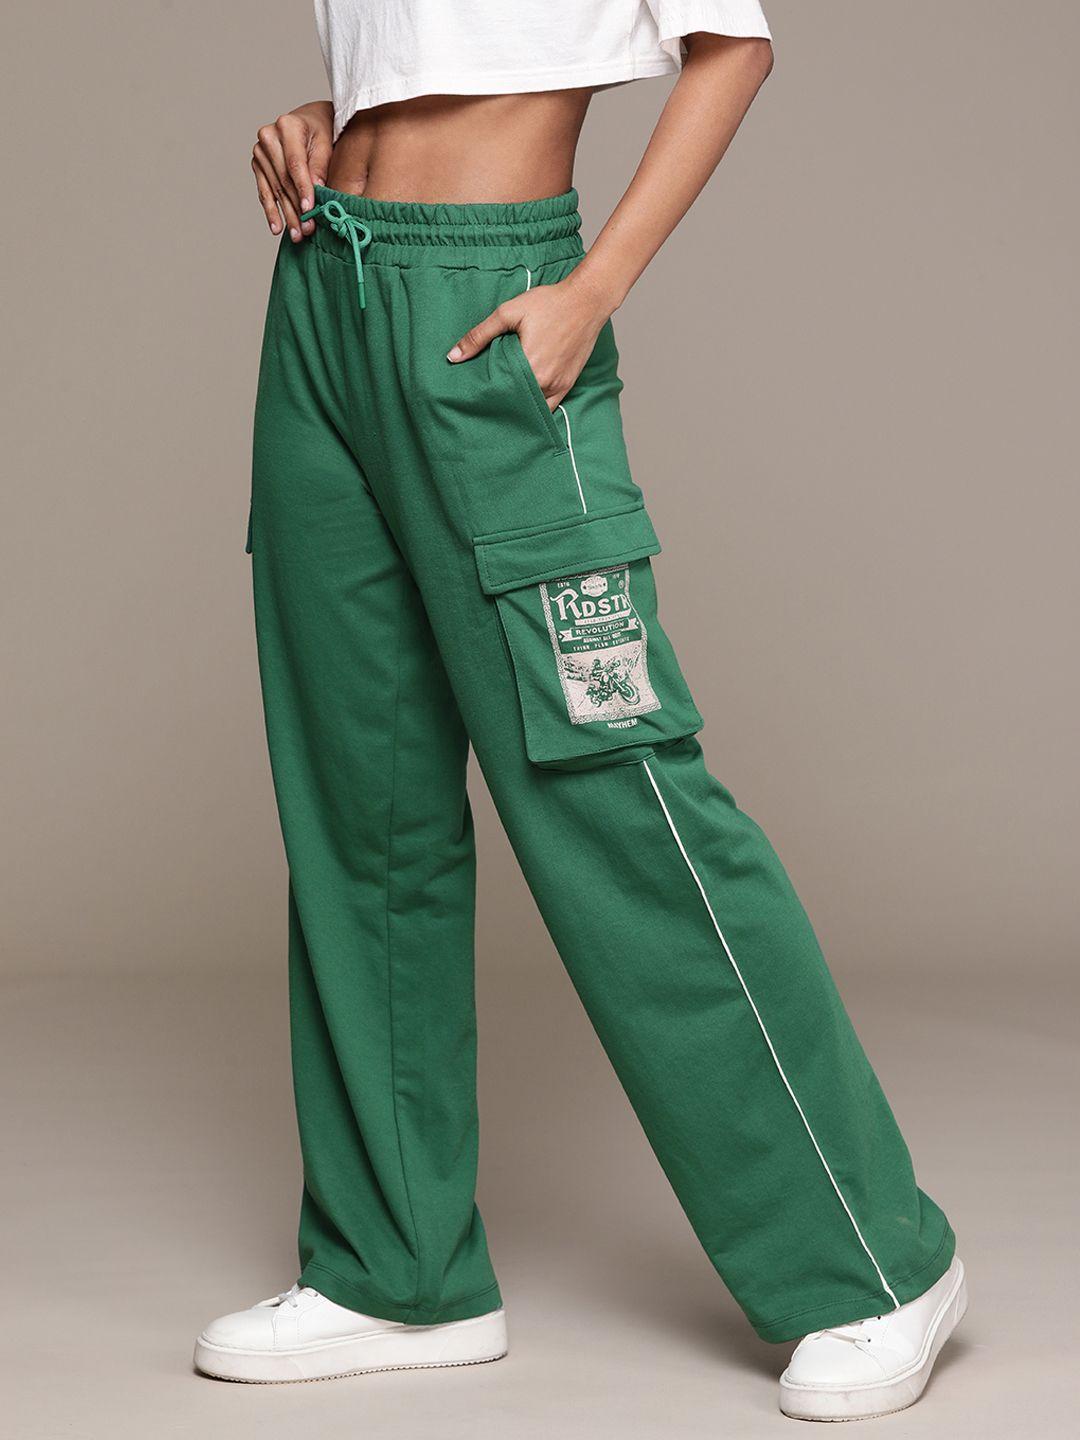 the roadster lifestyle co. re/lax women solid baggy track pants